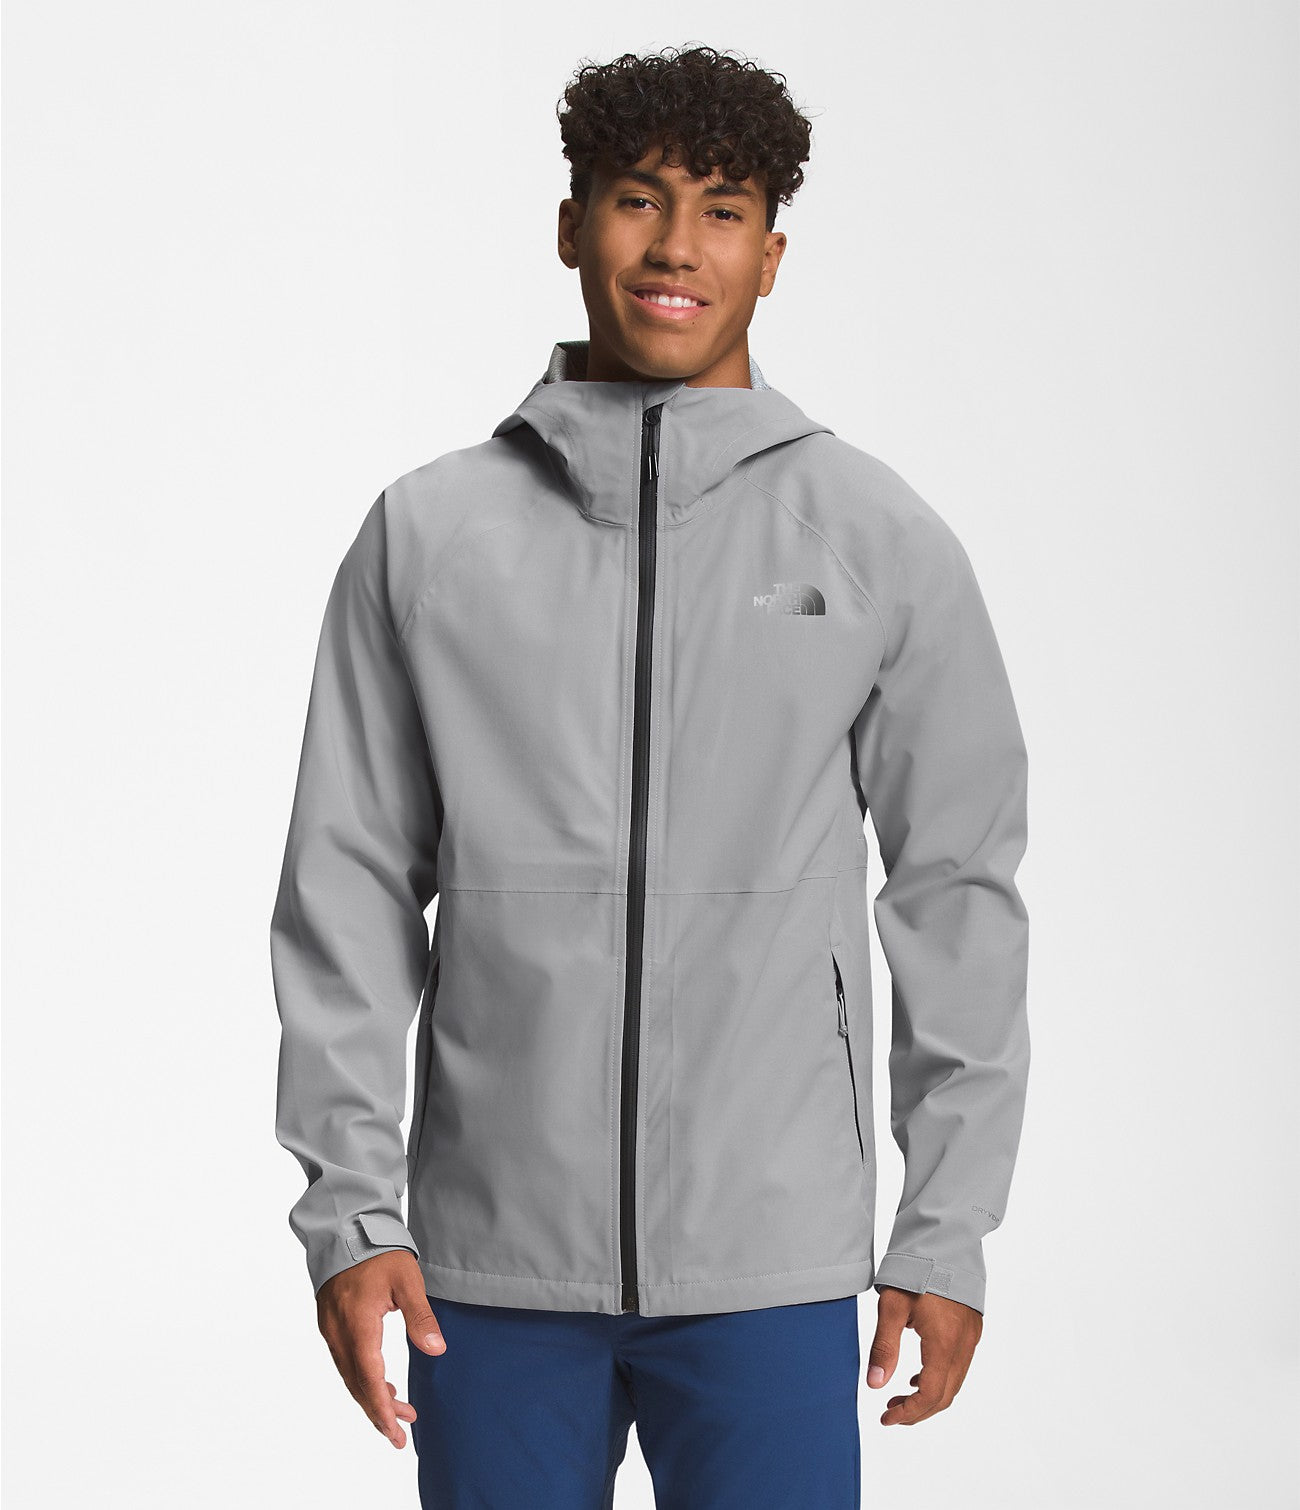 The North Face Men’s Valle Vista Stretch Jacket Apparel North Face Meld Grey-A91 Small 